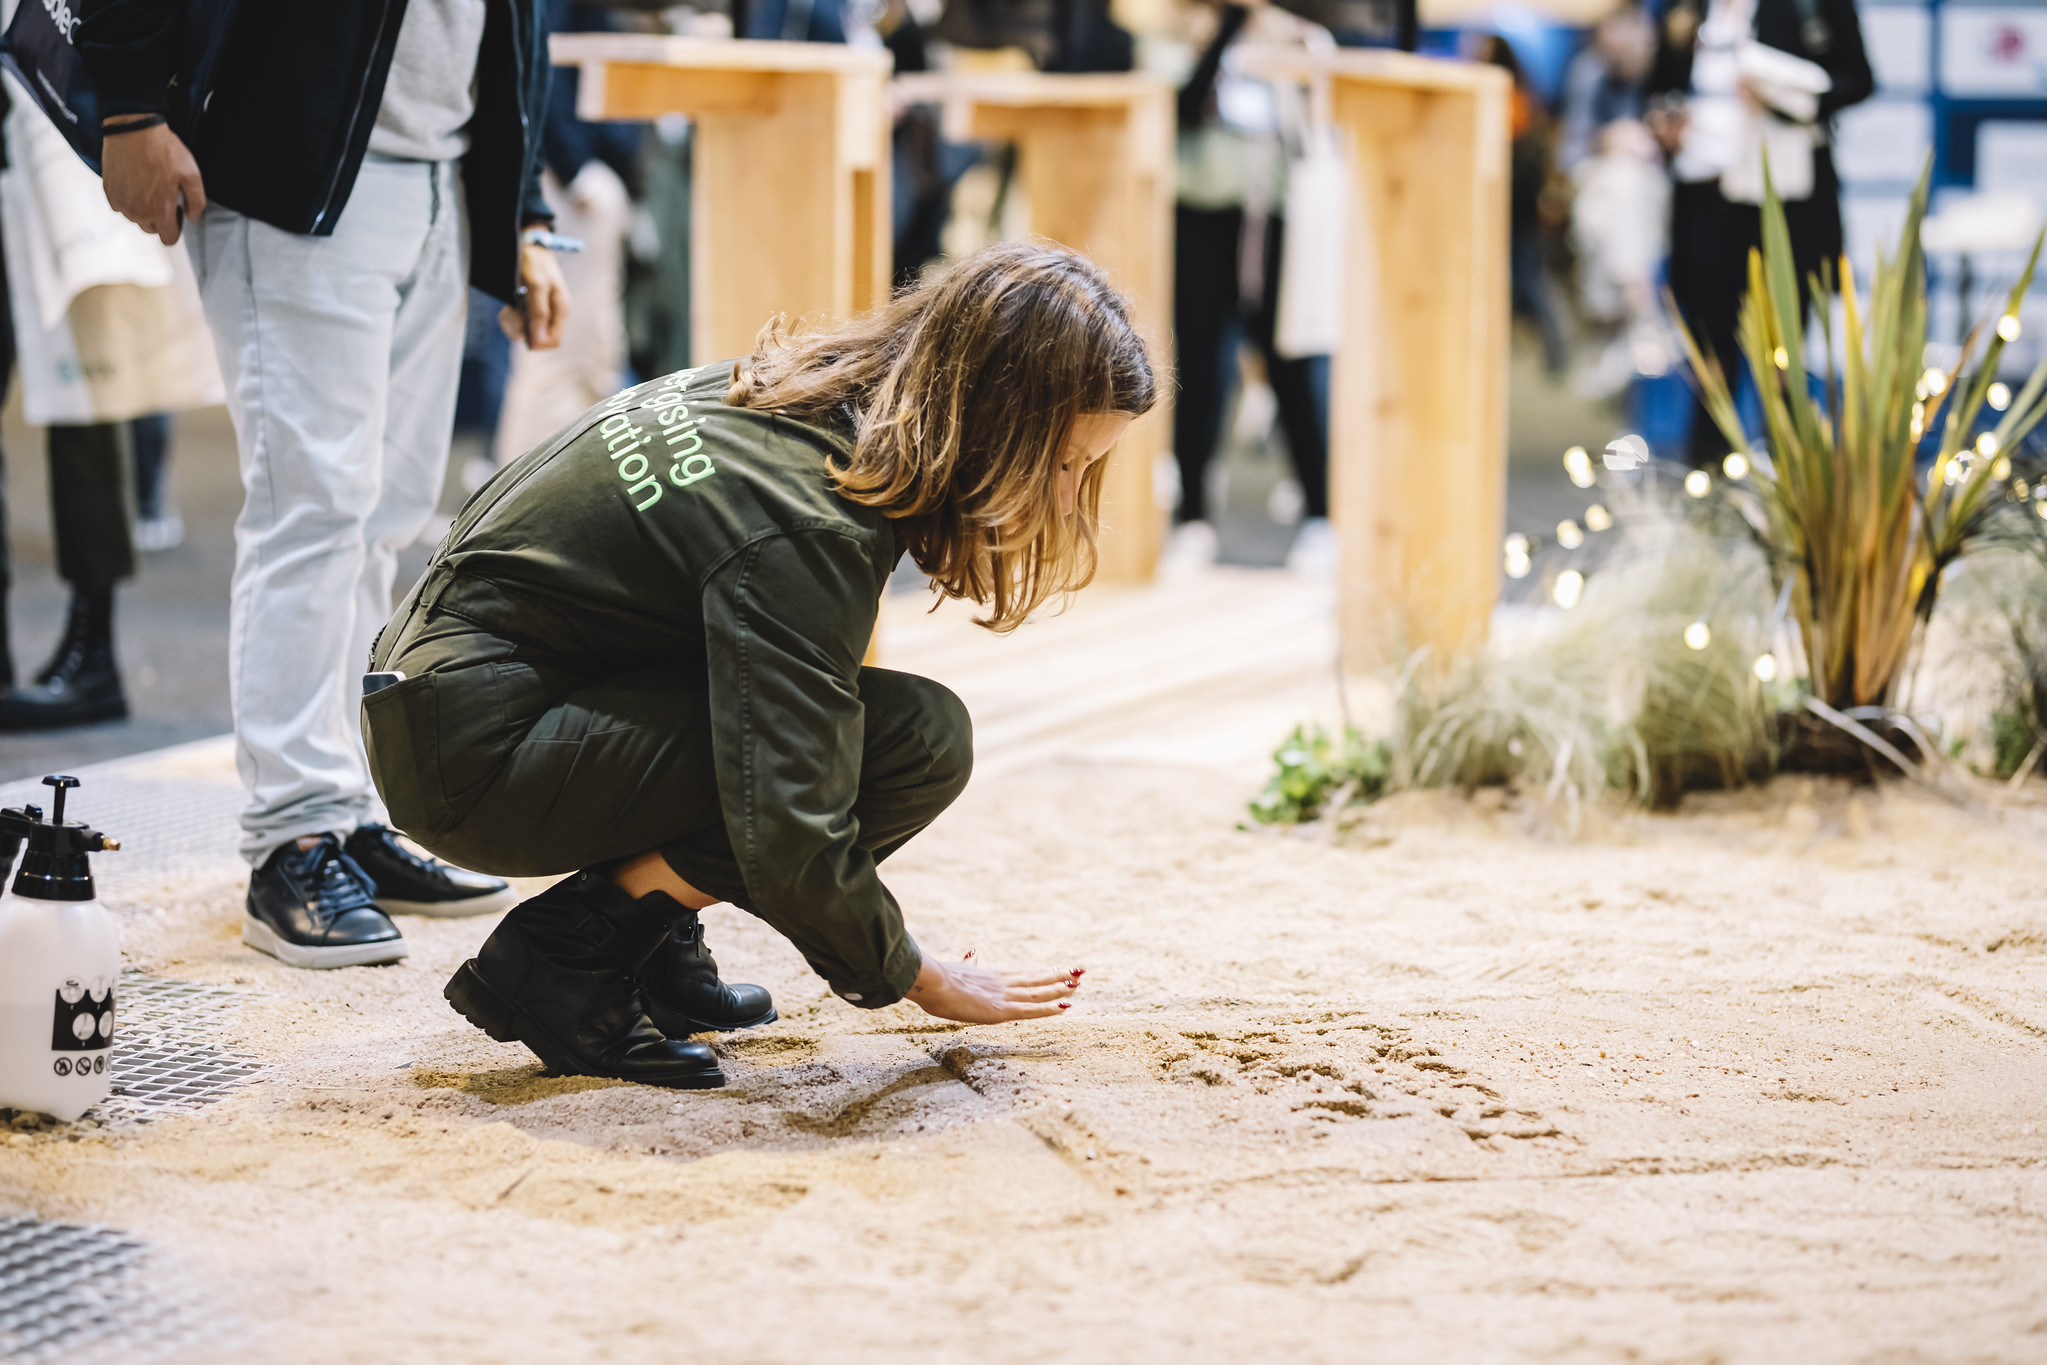 A person squats on a sandy surface. Their right hand is splayed inches above the ground, where something appears to be drawn or written in the sand. People appear to be walking by in the background. This is the exhibition floor at Web Summit.